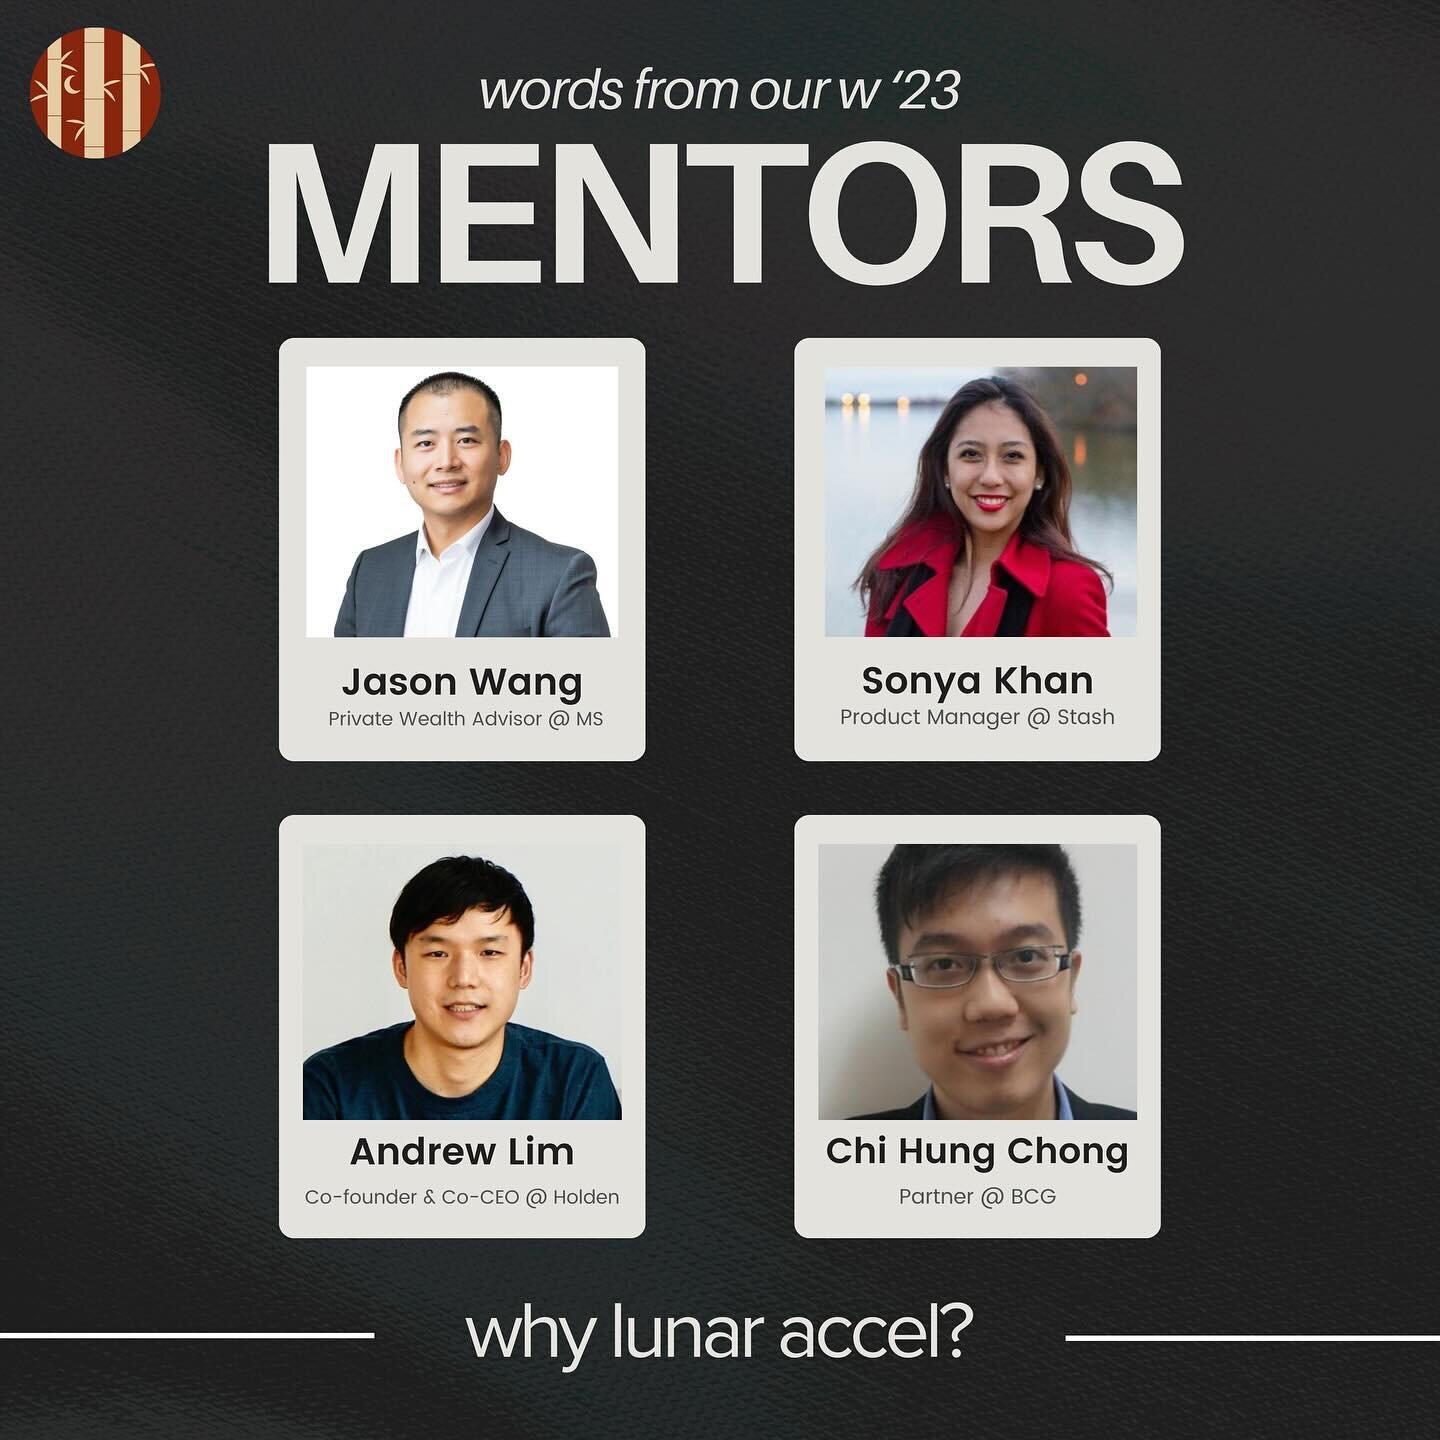 This past winter, we were able to source an incredible &amp; eclectic group of mentors that have provided an unparalleled sense of community, guidance, &amp; fun. Delve into Jason, Sonya, Andrew, and Chi&rsquo;s perspectives about why Lunar Accel is 